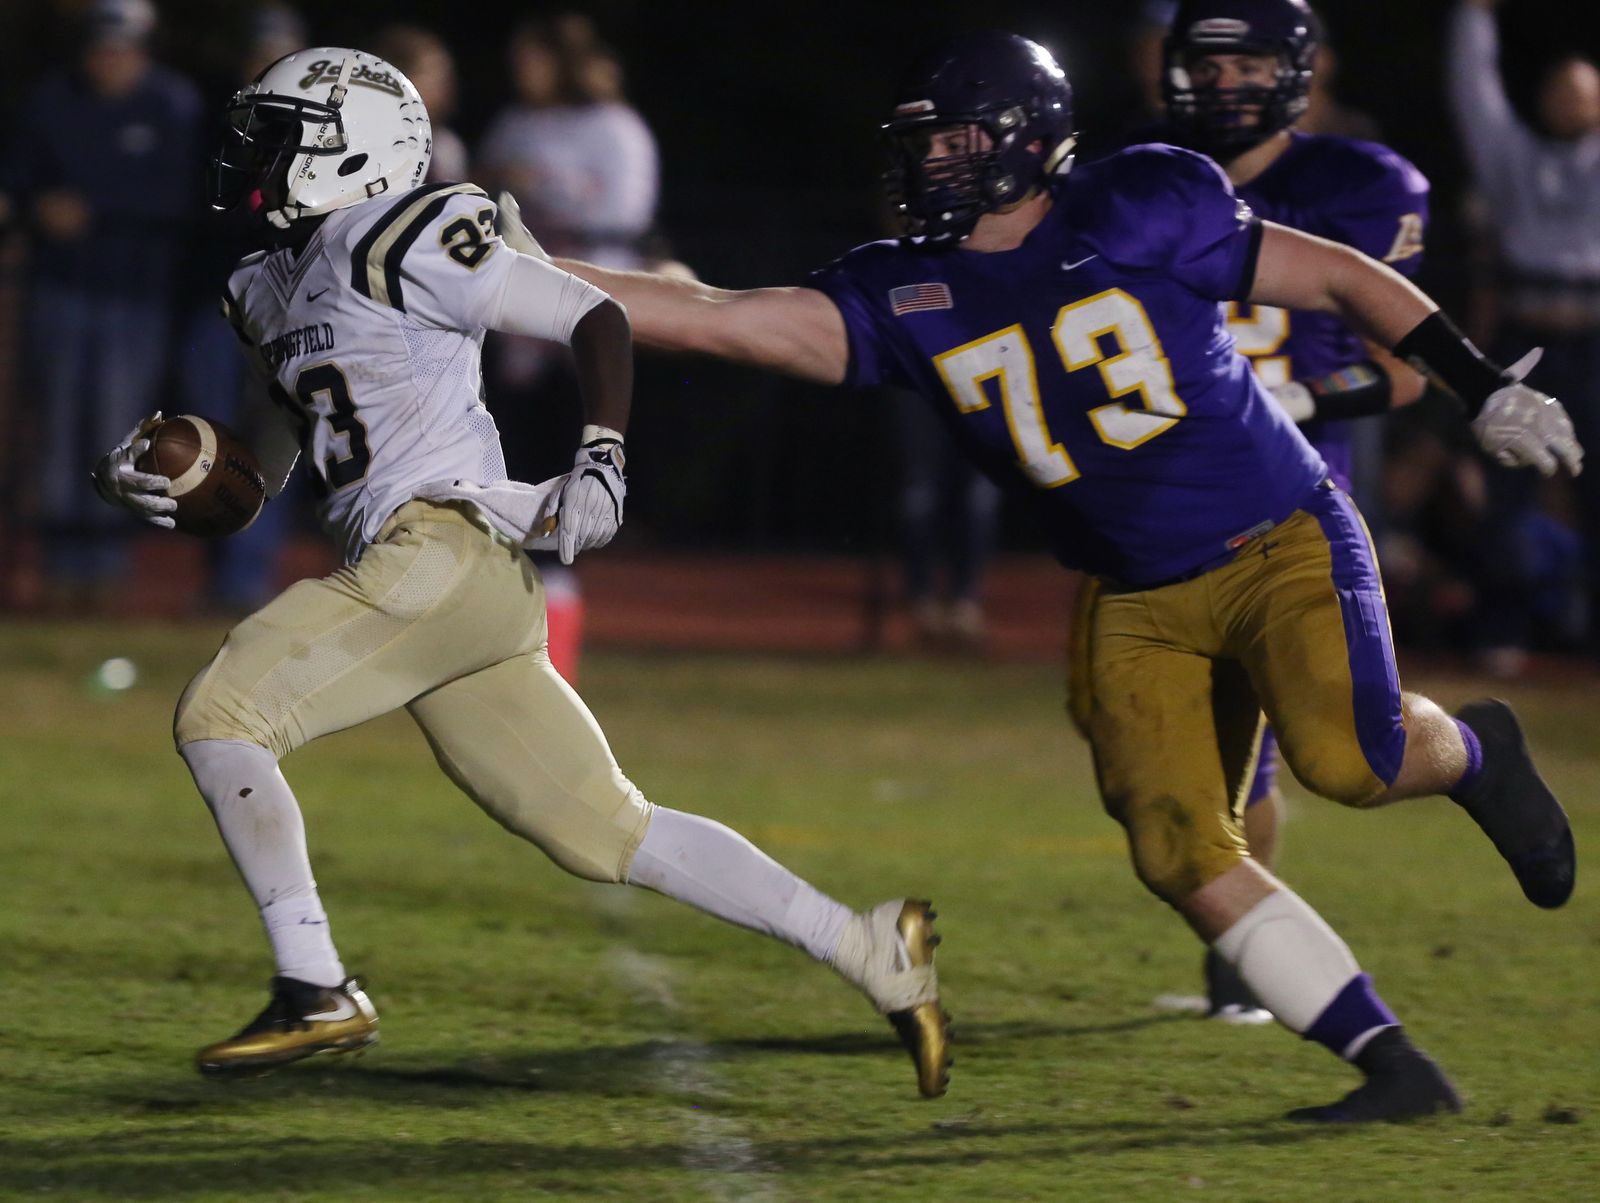 Springfield's Dayron Johnson crosses the goal line to score a touchdown as Lipscomb Academy's Rutger Reitmaier attempts to tackle him during their playoff game at Lipscomb Academy Friday November 4, 2016.